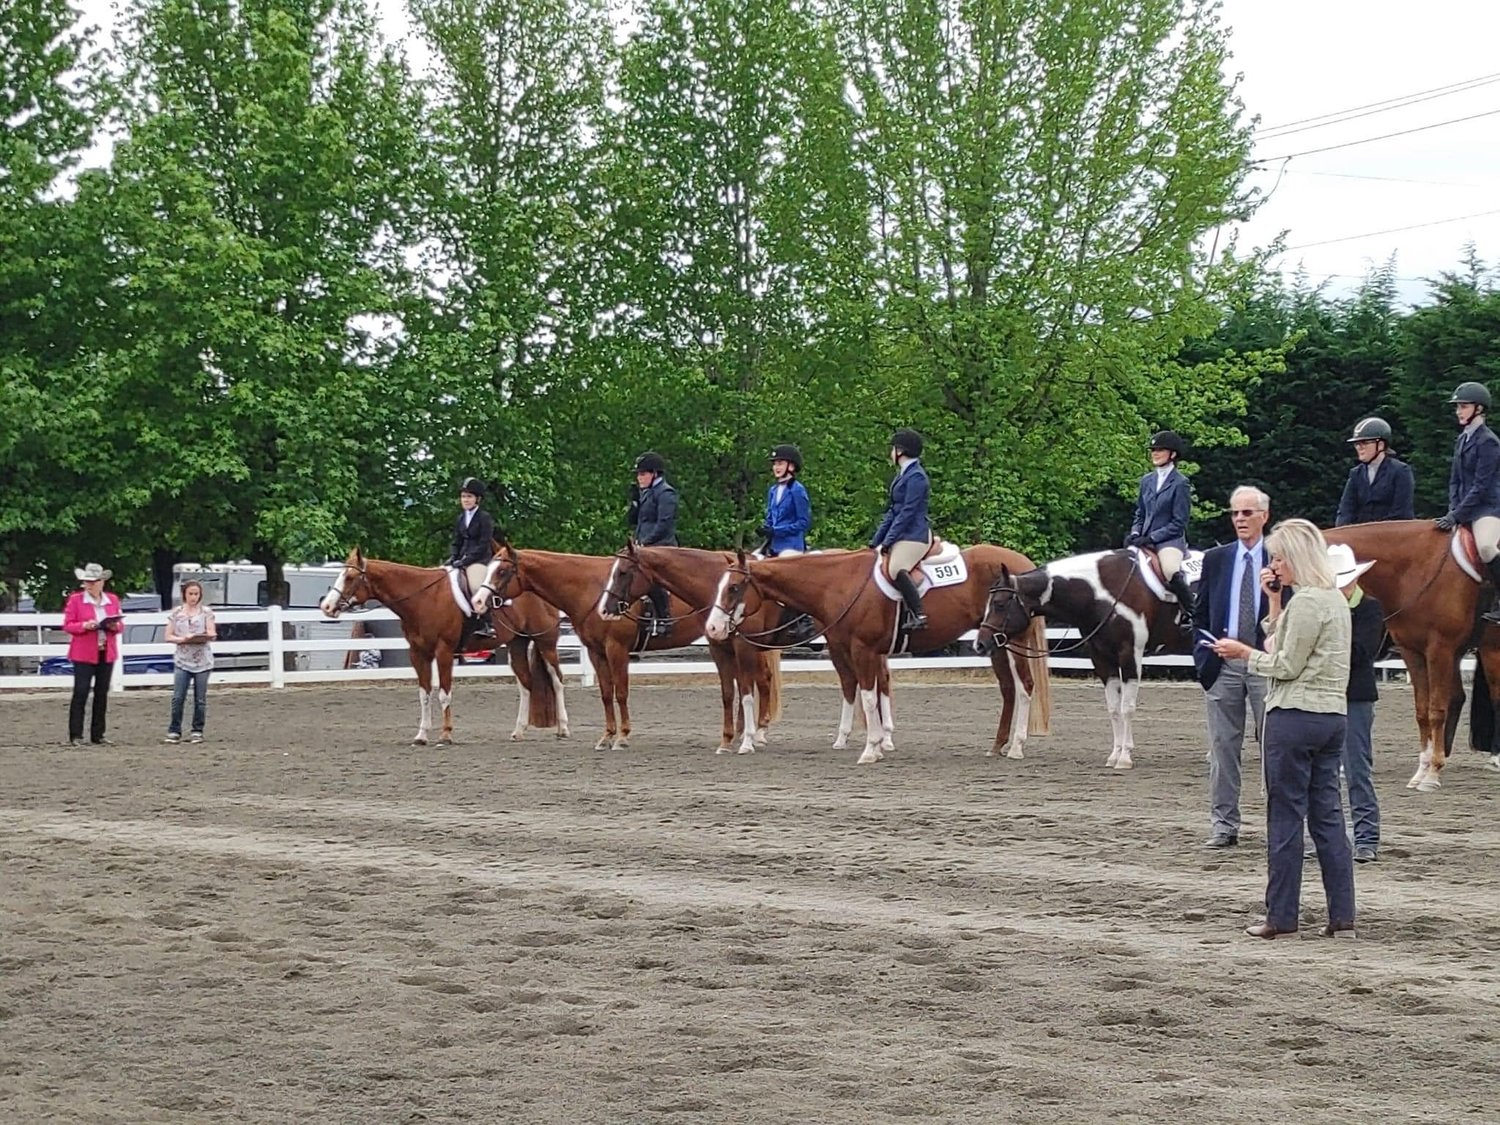 Riders from Wilson Show Horses stand ready to compete at the Washington State Paint Horse Club show in July.